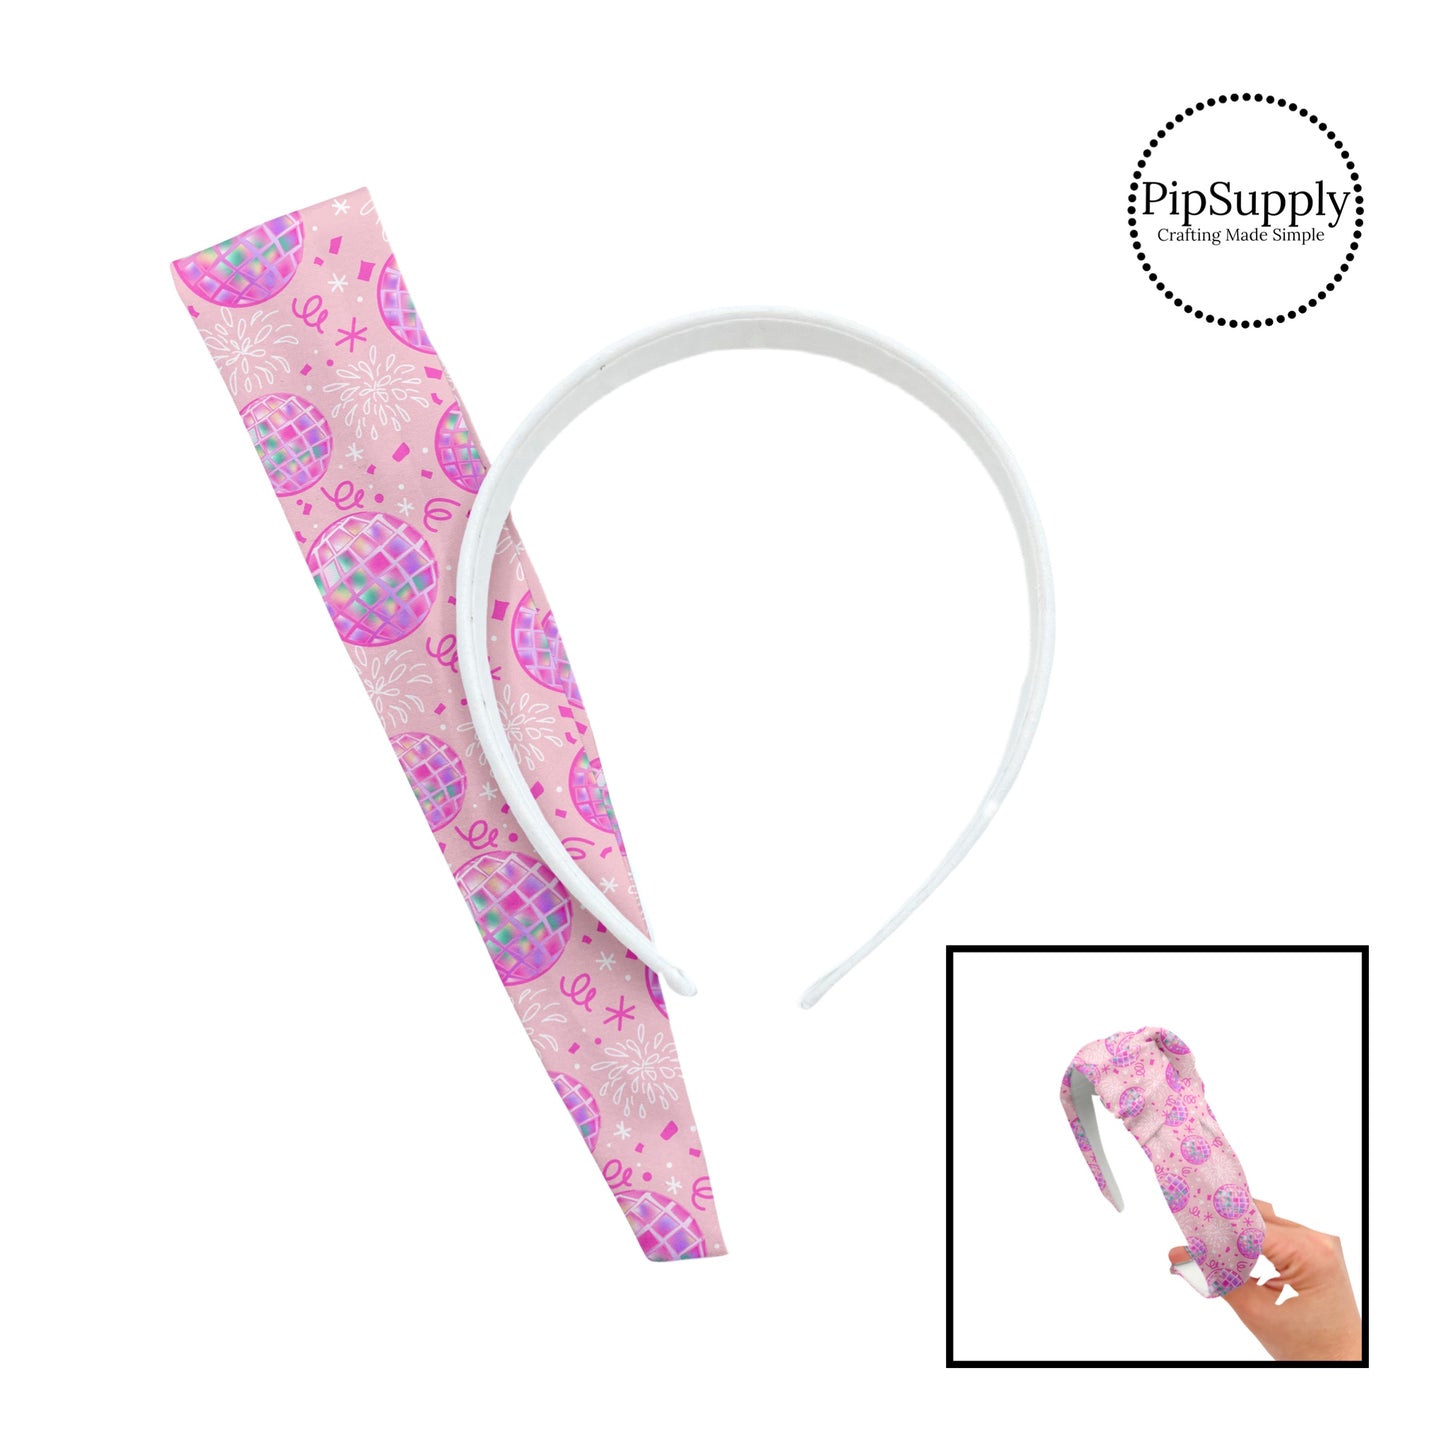 Pink disco ball, fireworks, and confetti on pink knotted headband kit